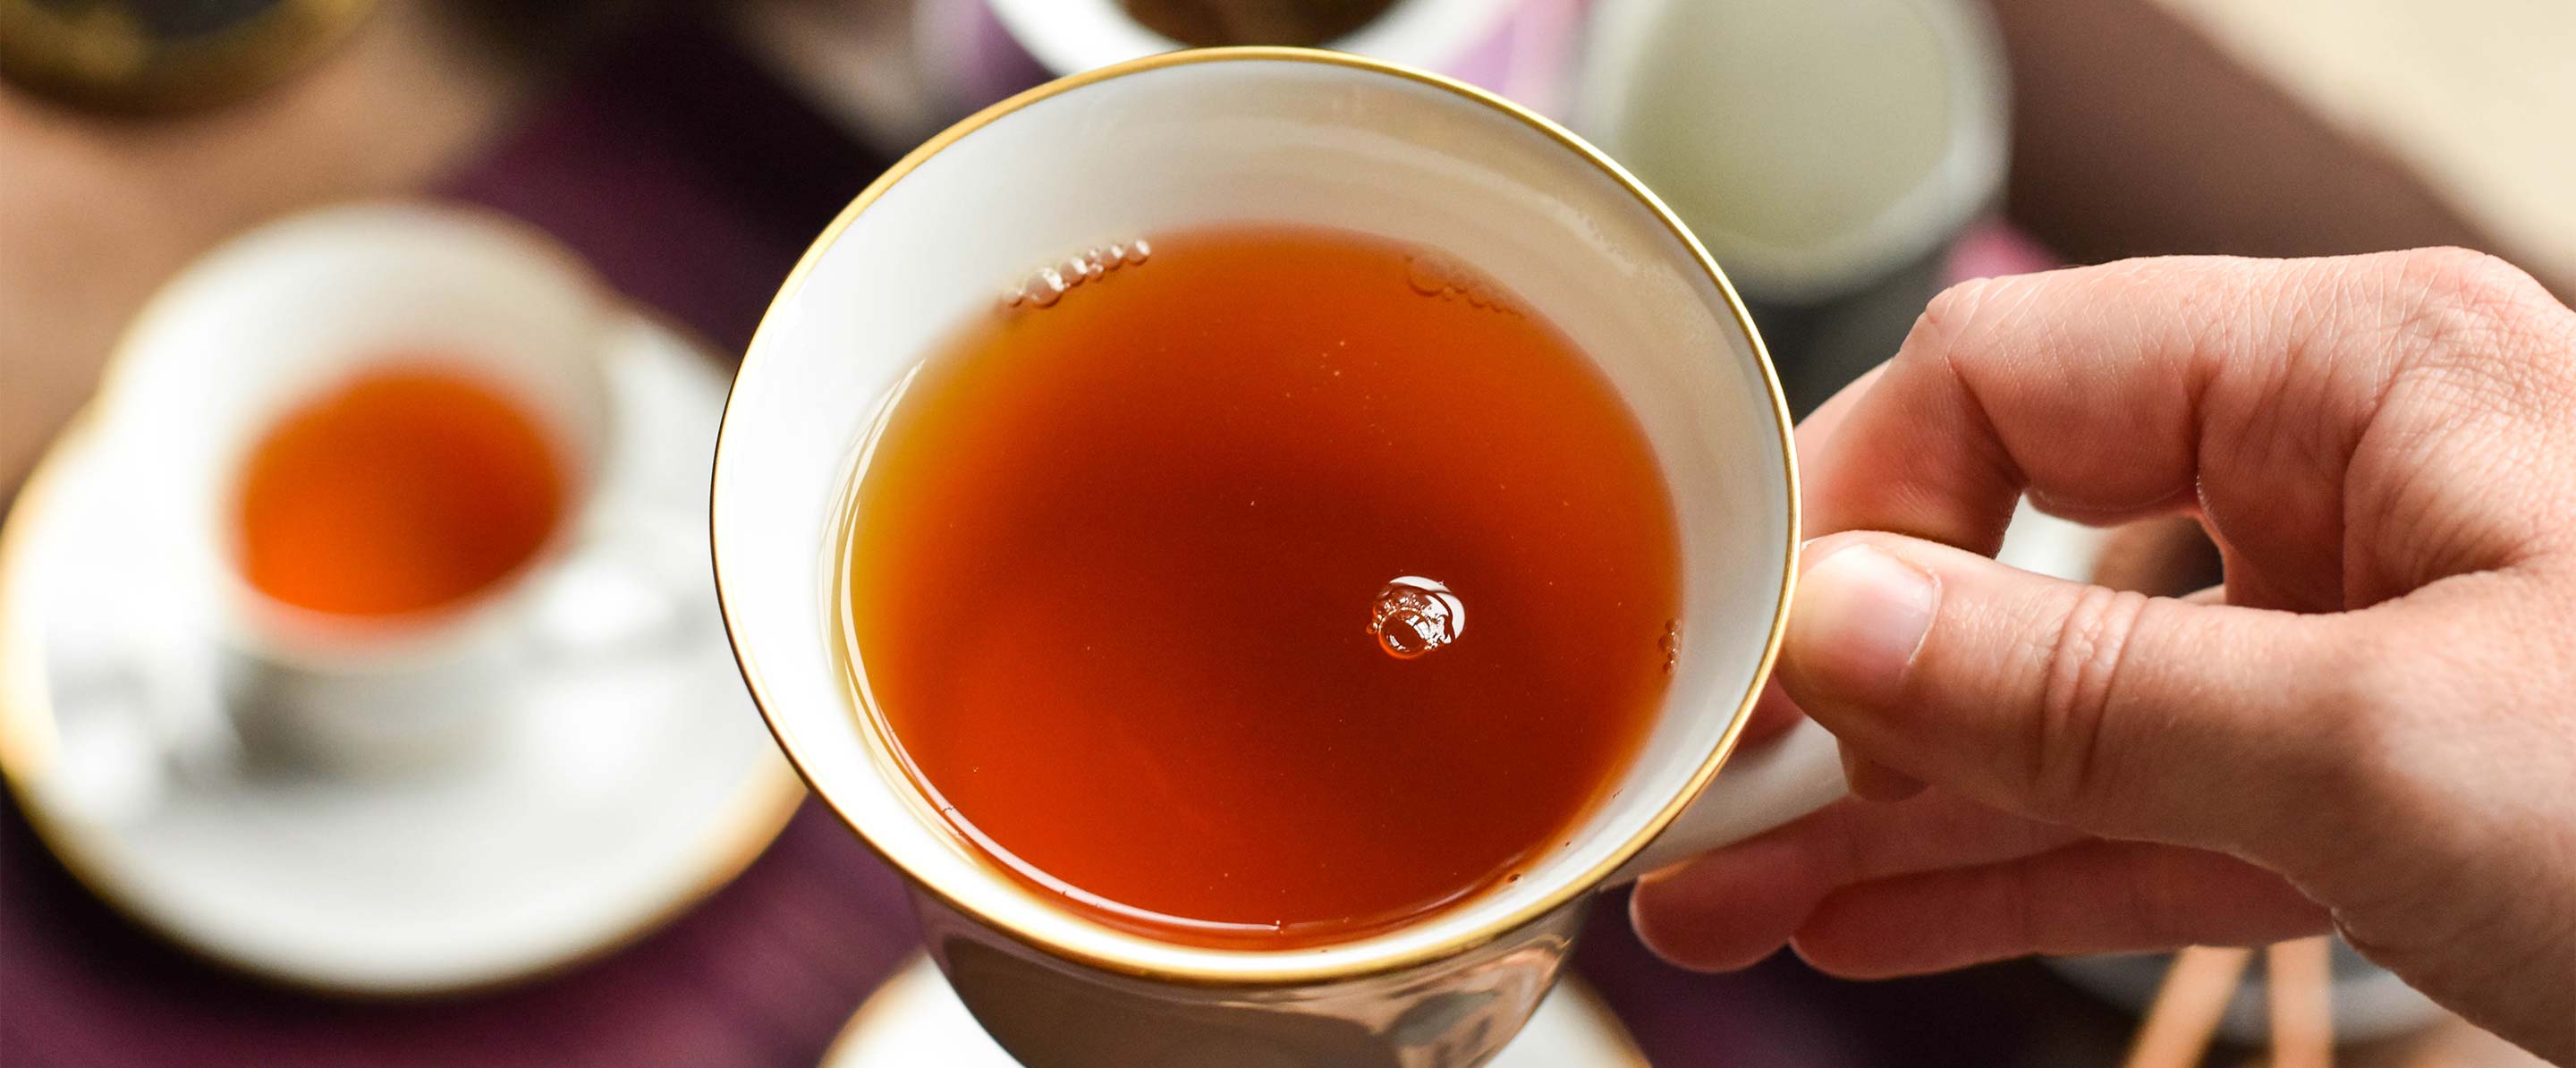 Does Tea Caffeine? The Complete Guide to Caffeine in Tea - Blog